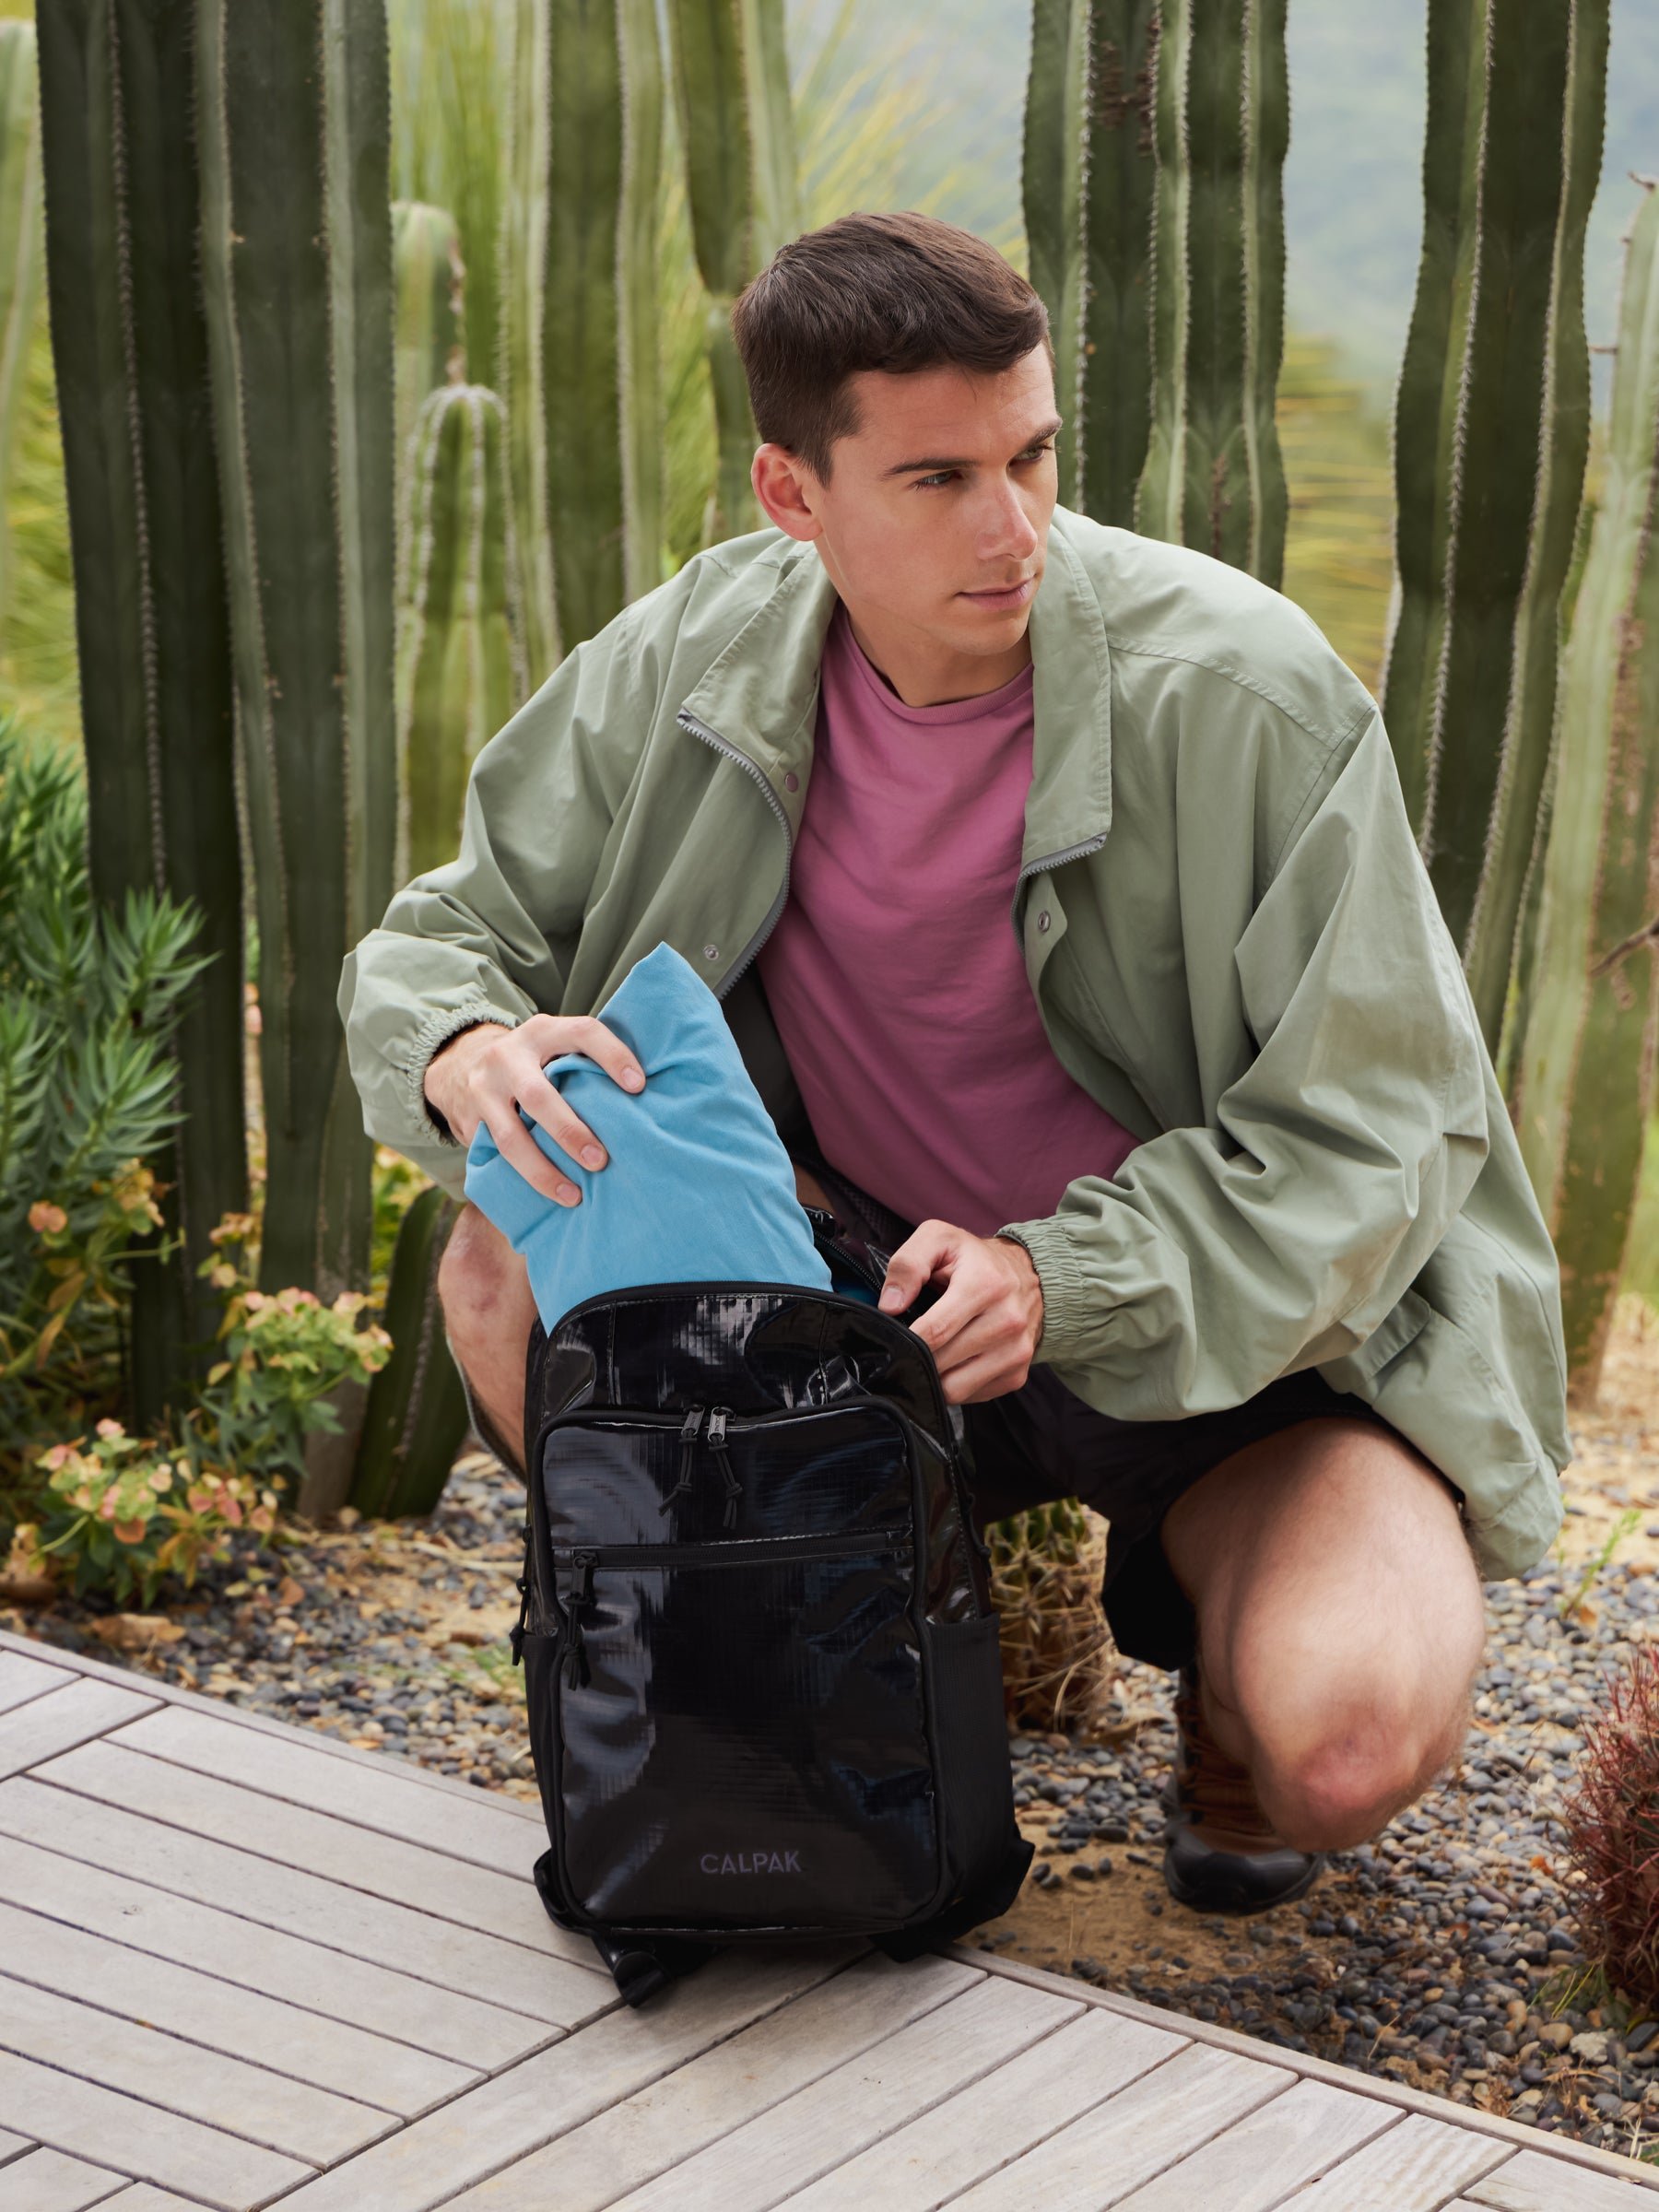 Model packing items in his black hydration backpack